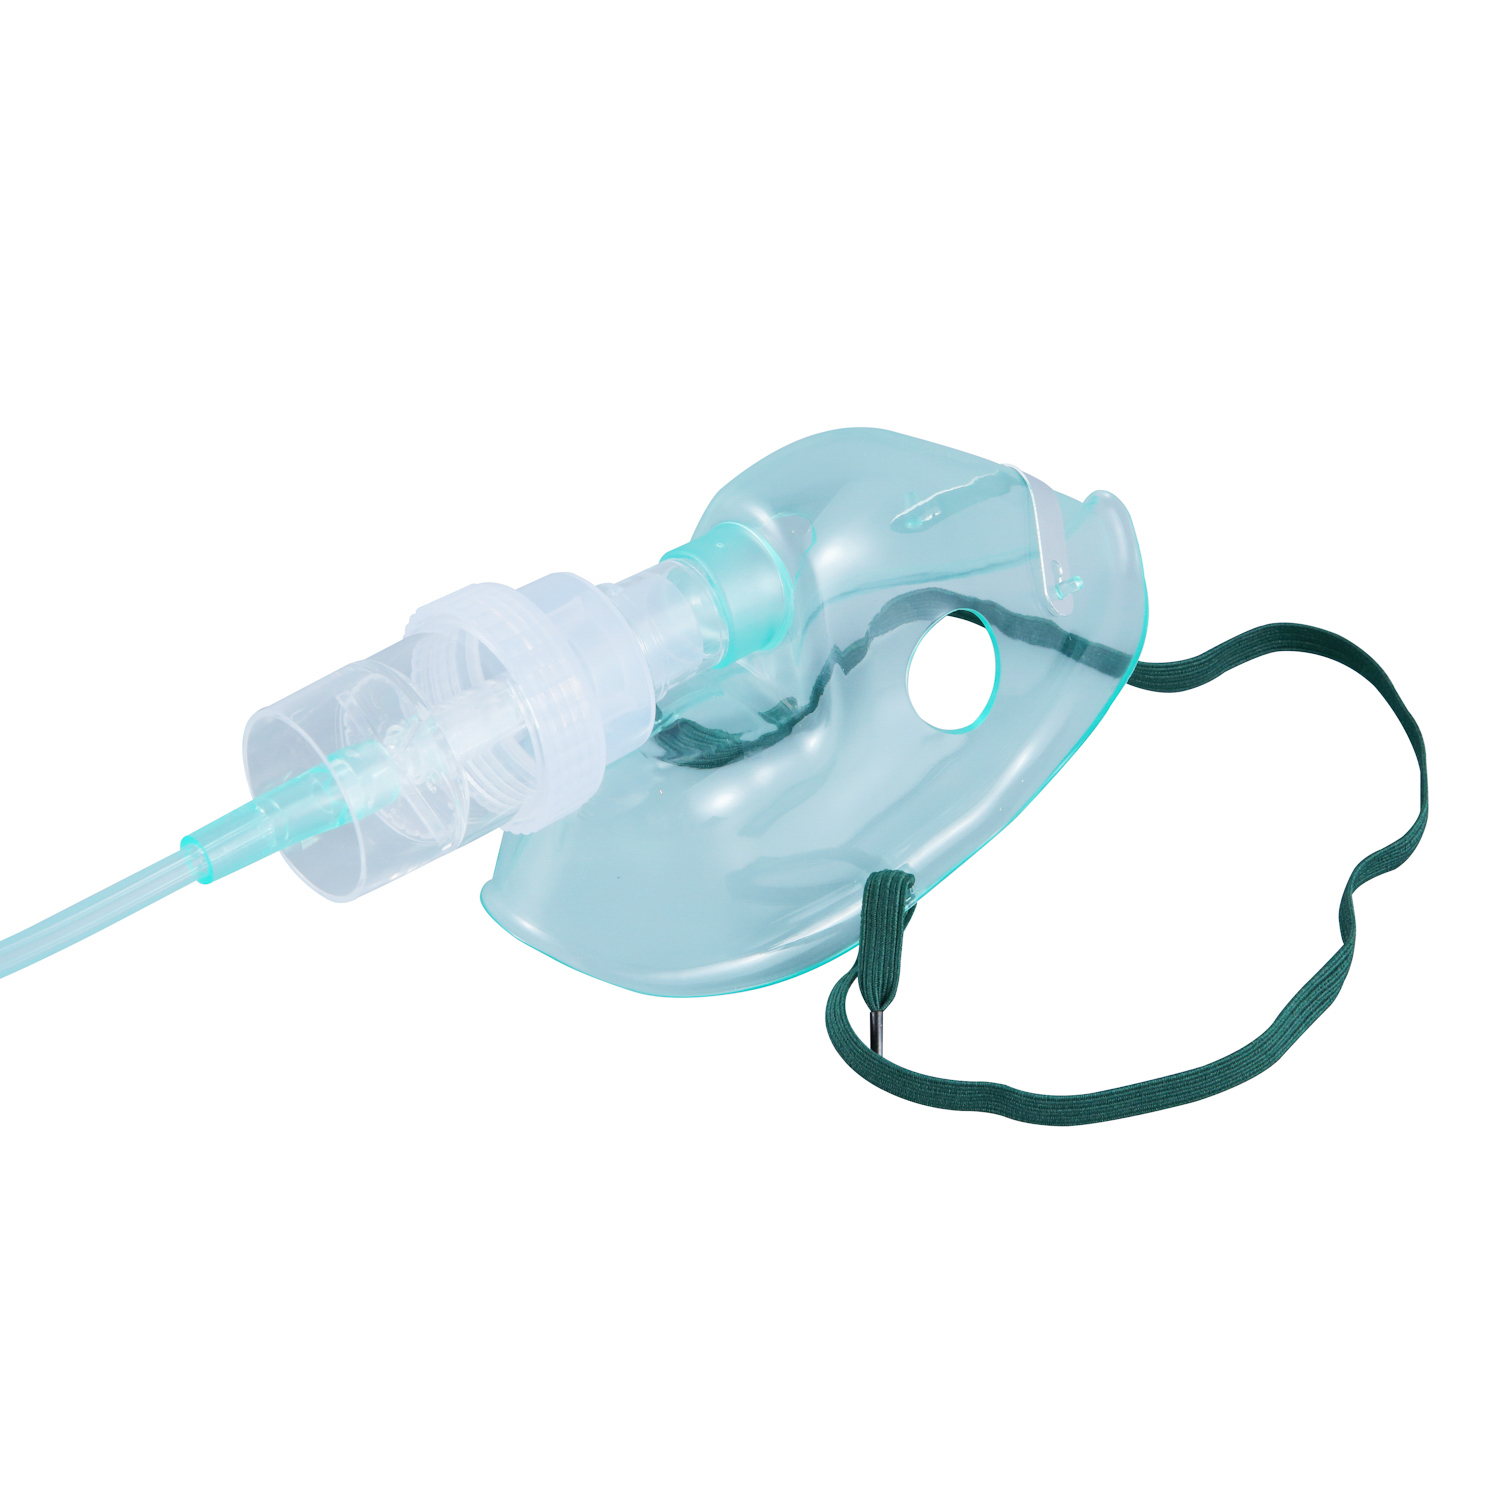 Why need a prescription for a nebulizer mask?